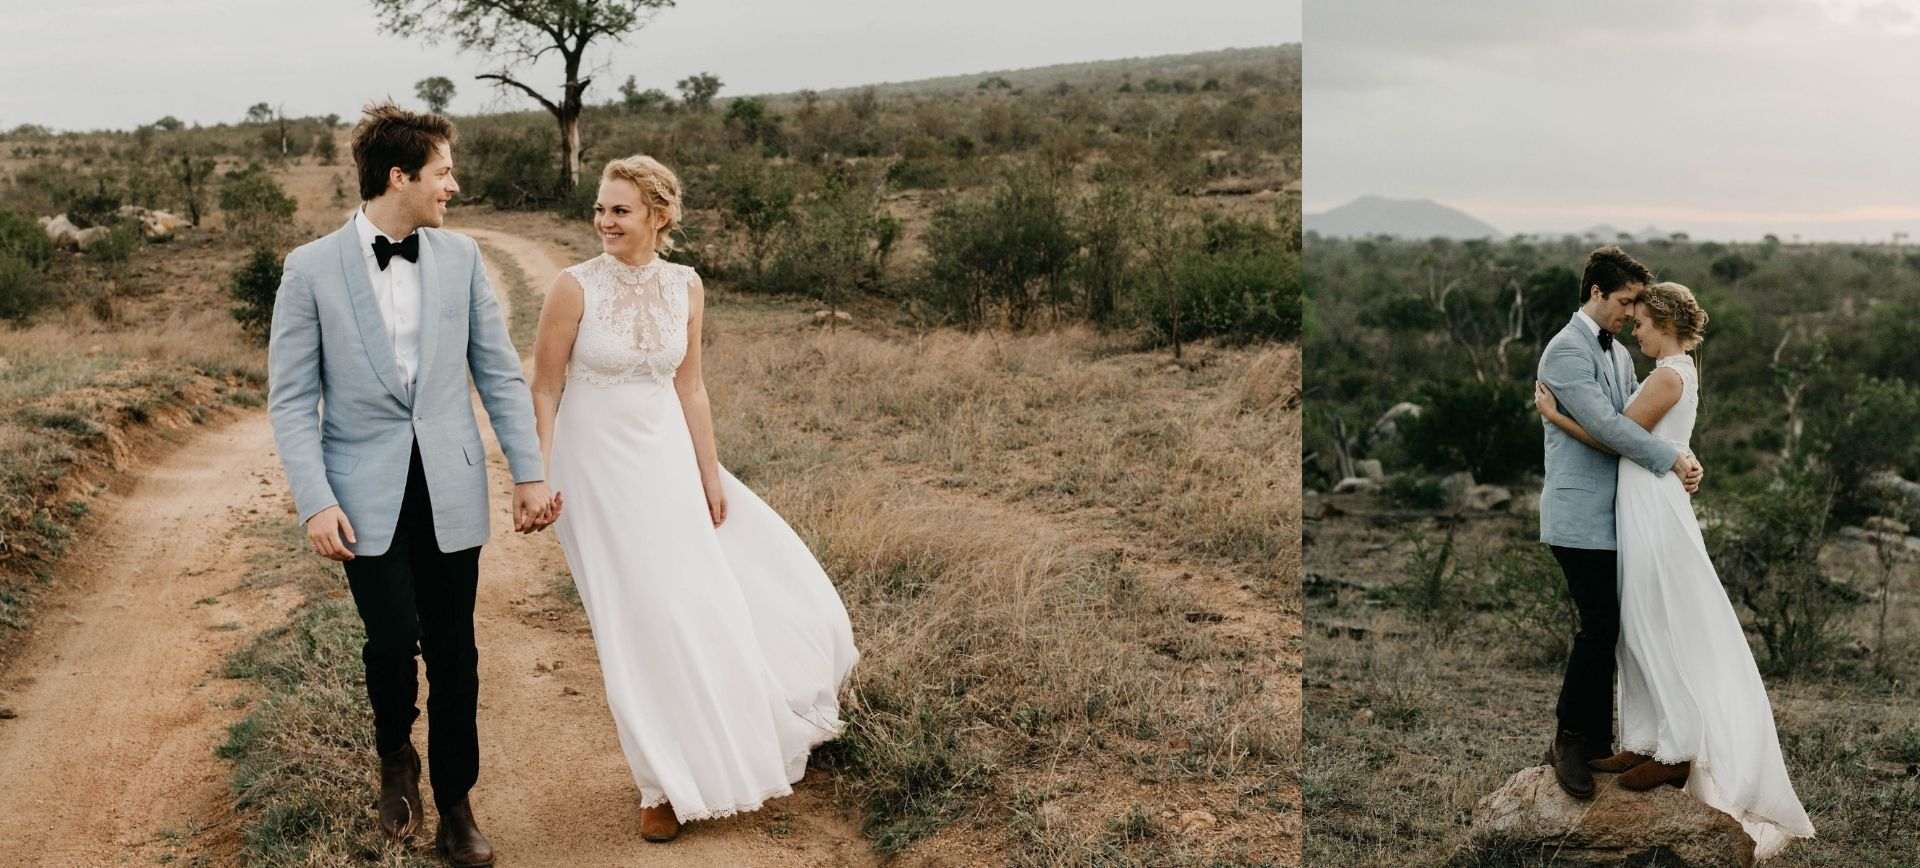 south africa elopement wedding - safari at your wedding day - bride and groom in bushland